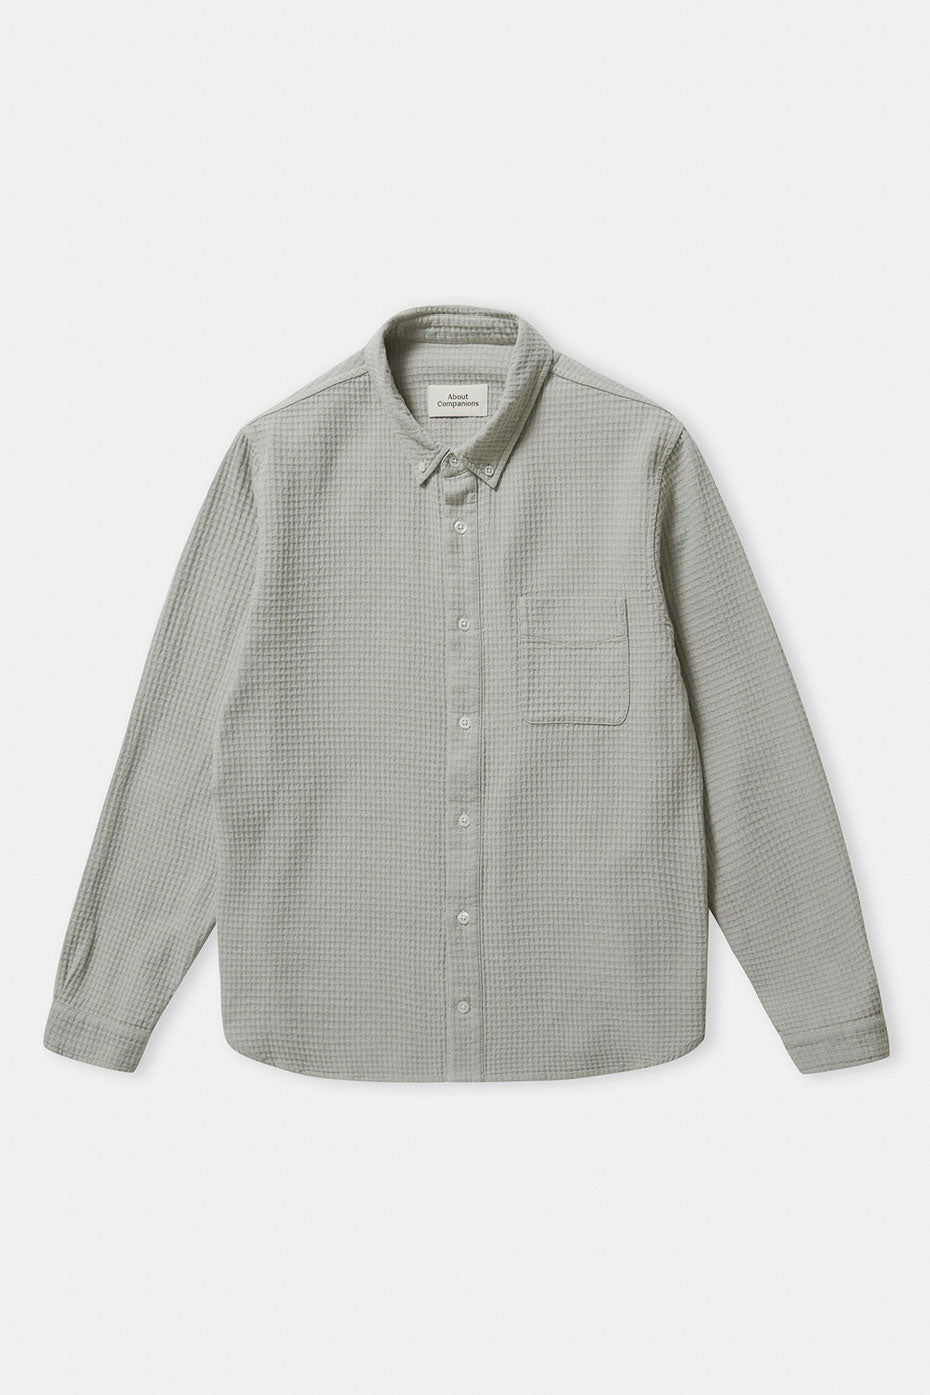 About Companions Reed Crepe Ken Shirt